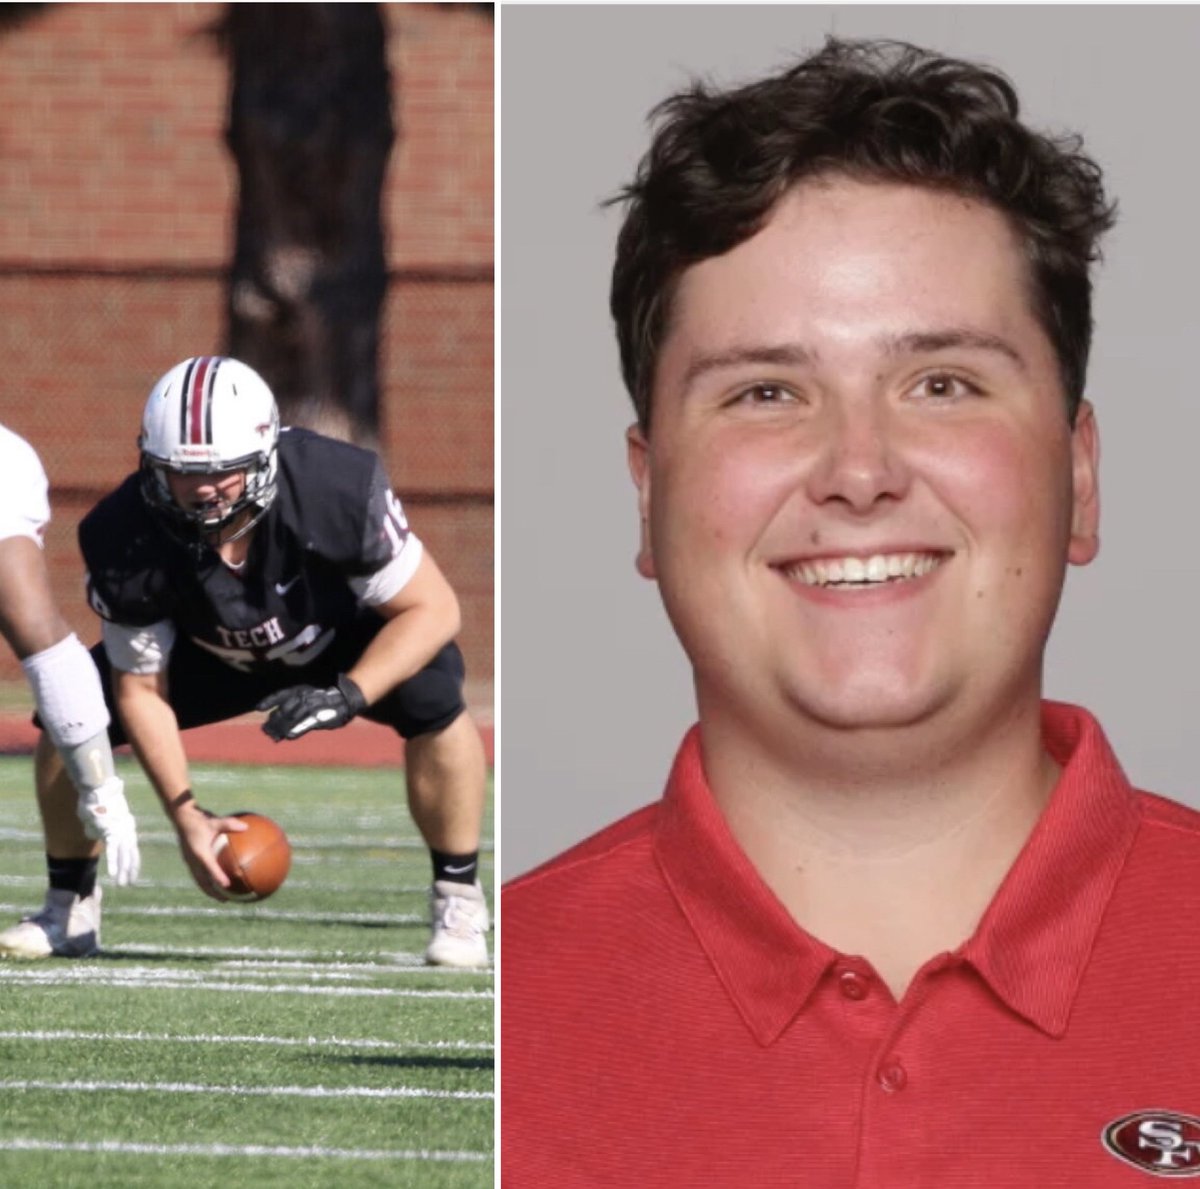 MIT Football alum Peyton Greve (‘22) is headed to the Super Bowl! The former Engineer OL is a Football Systems Personnel Analyst with the @49ers. Best of luck in the big game, Peyton! #RollTech🏈🏆🎉🦫 @peytongreve3